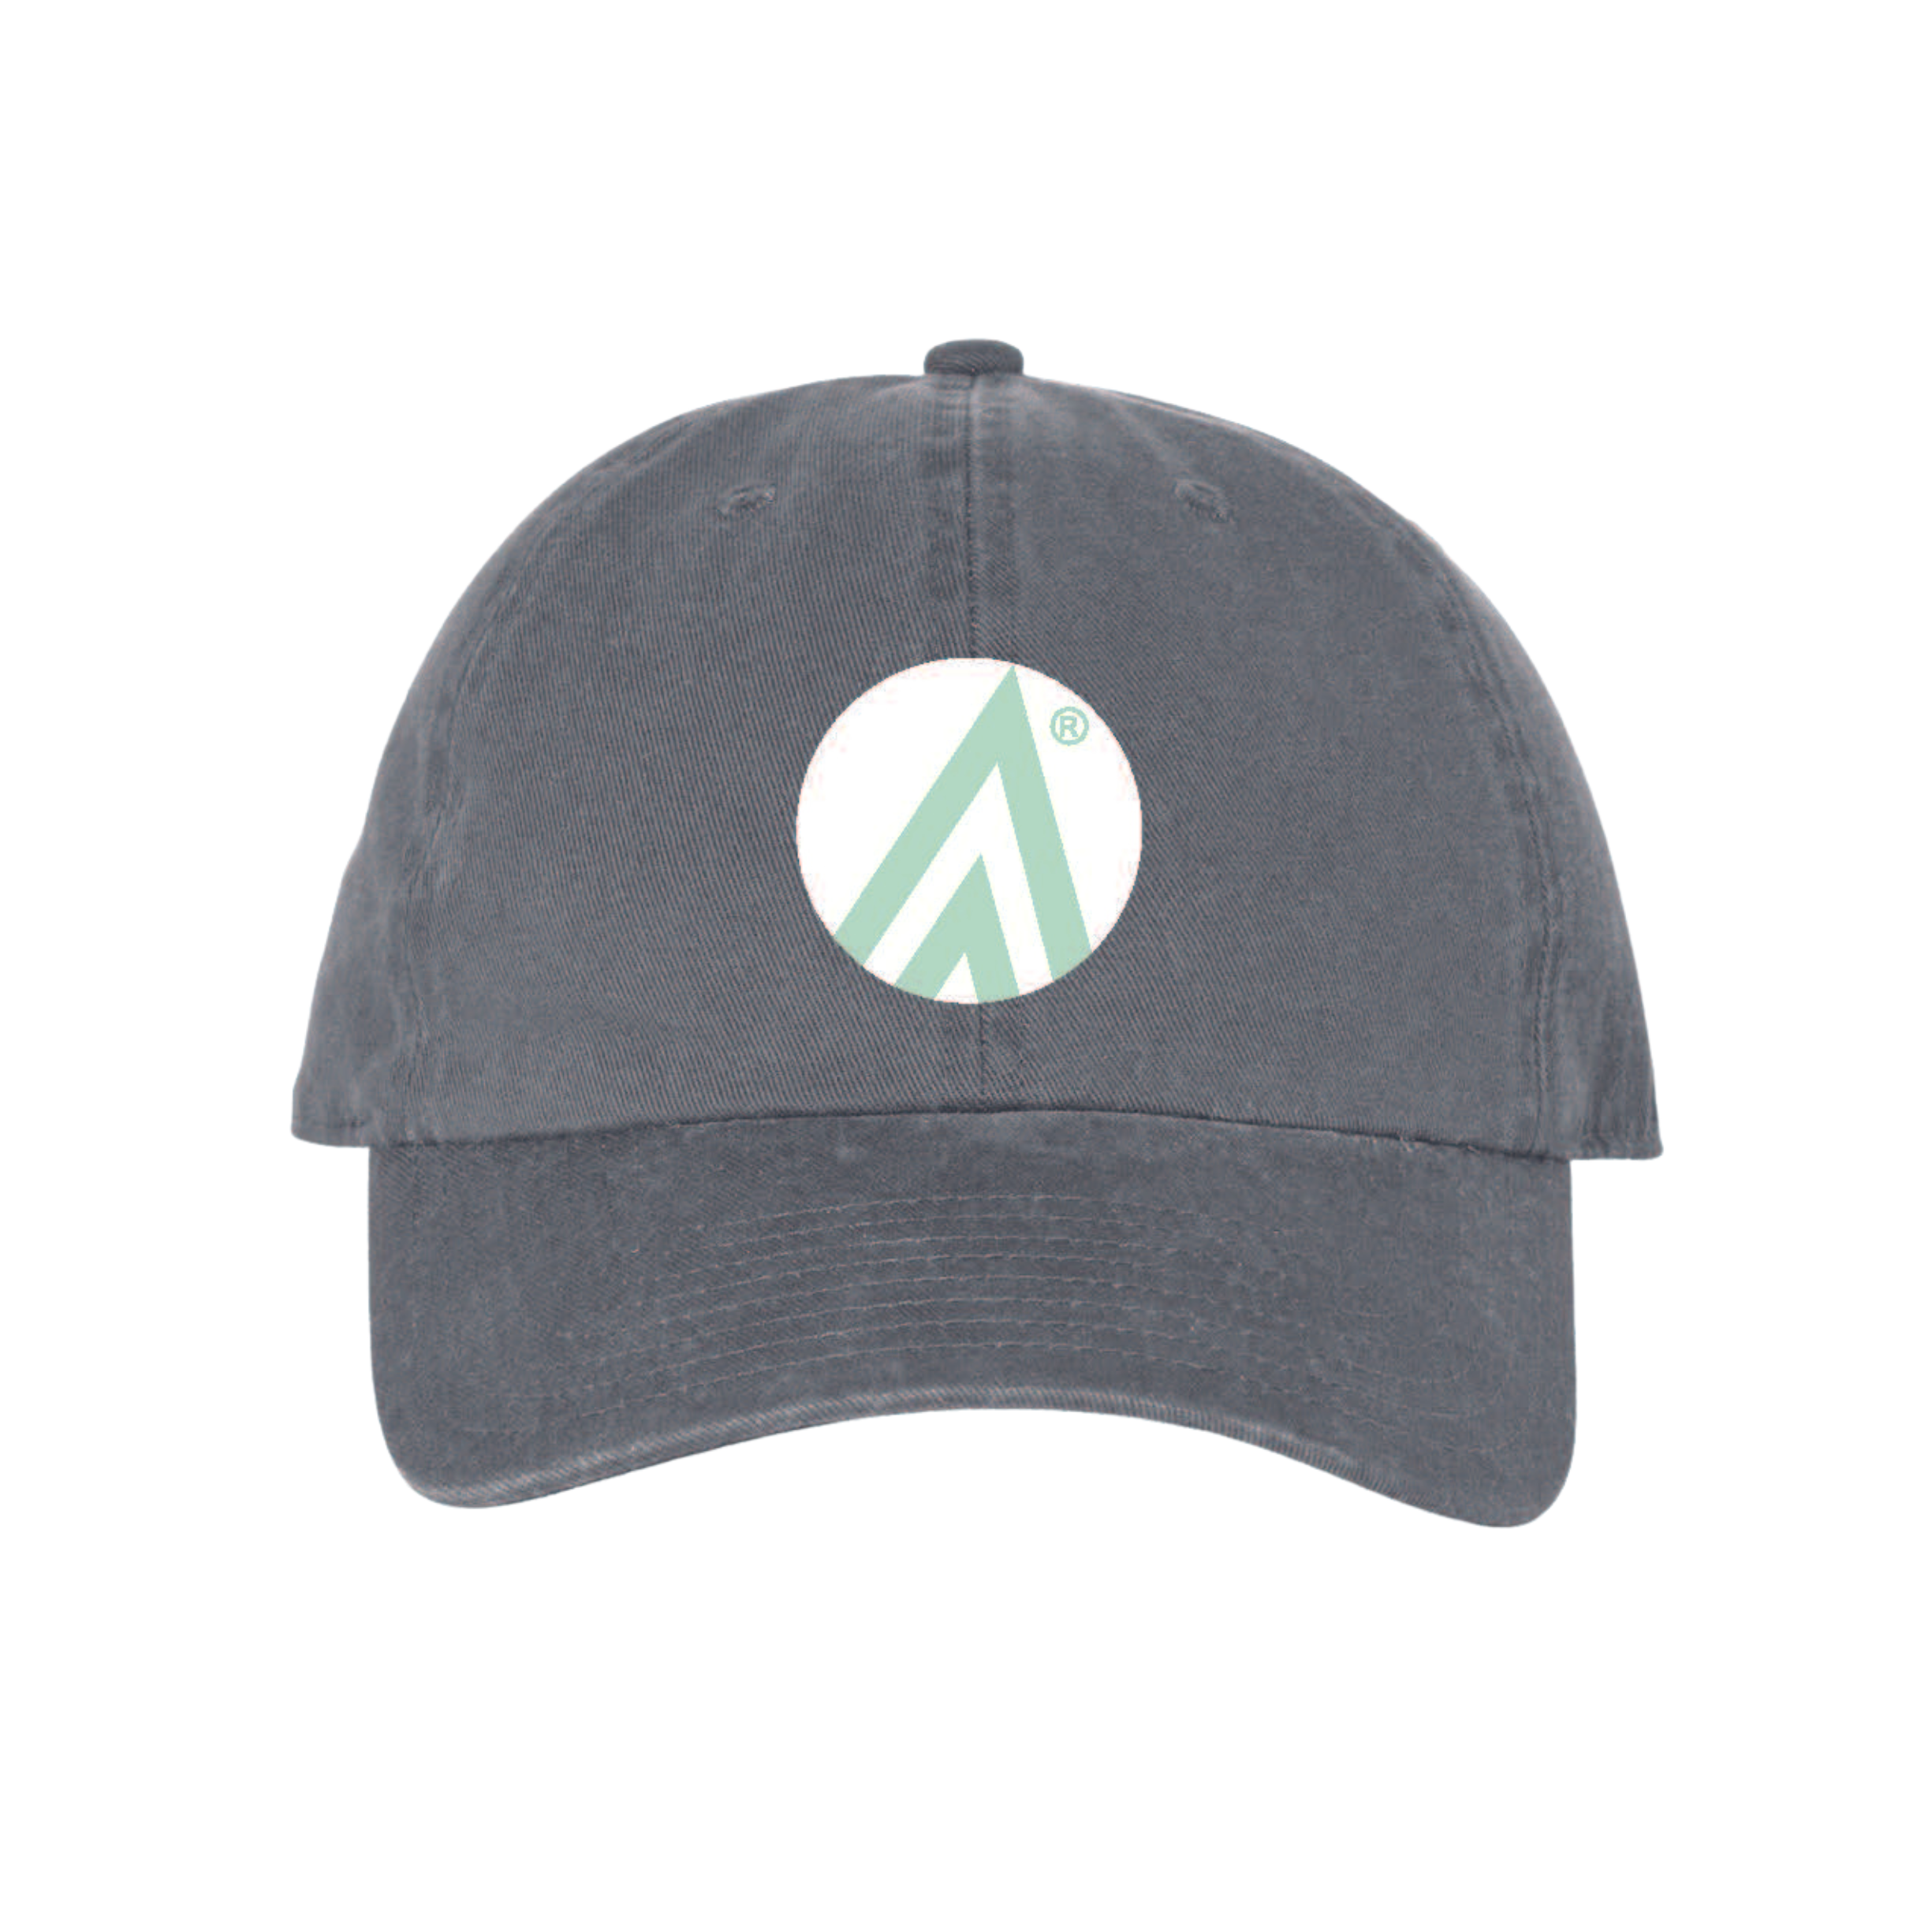 LAIRE Gray Mint Baseball Hat